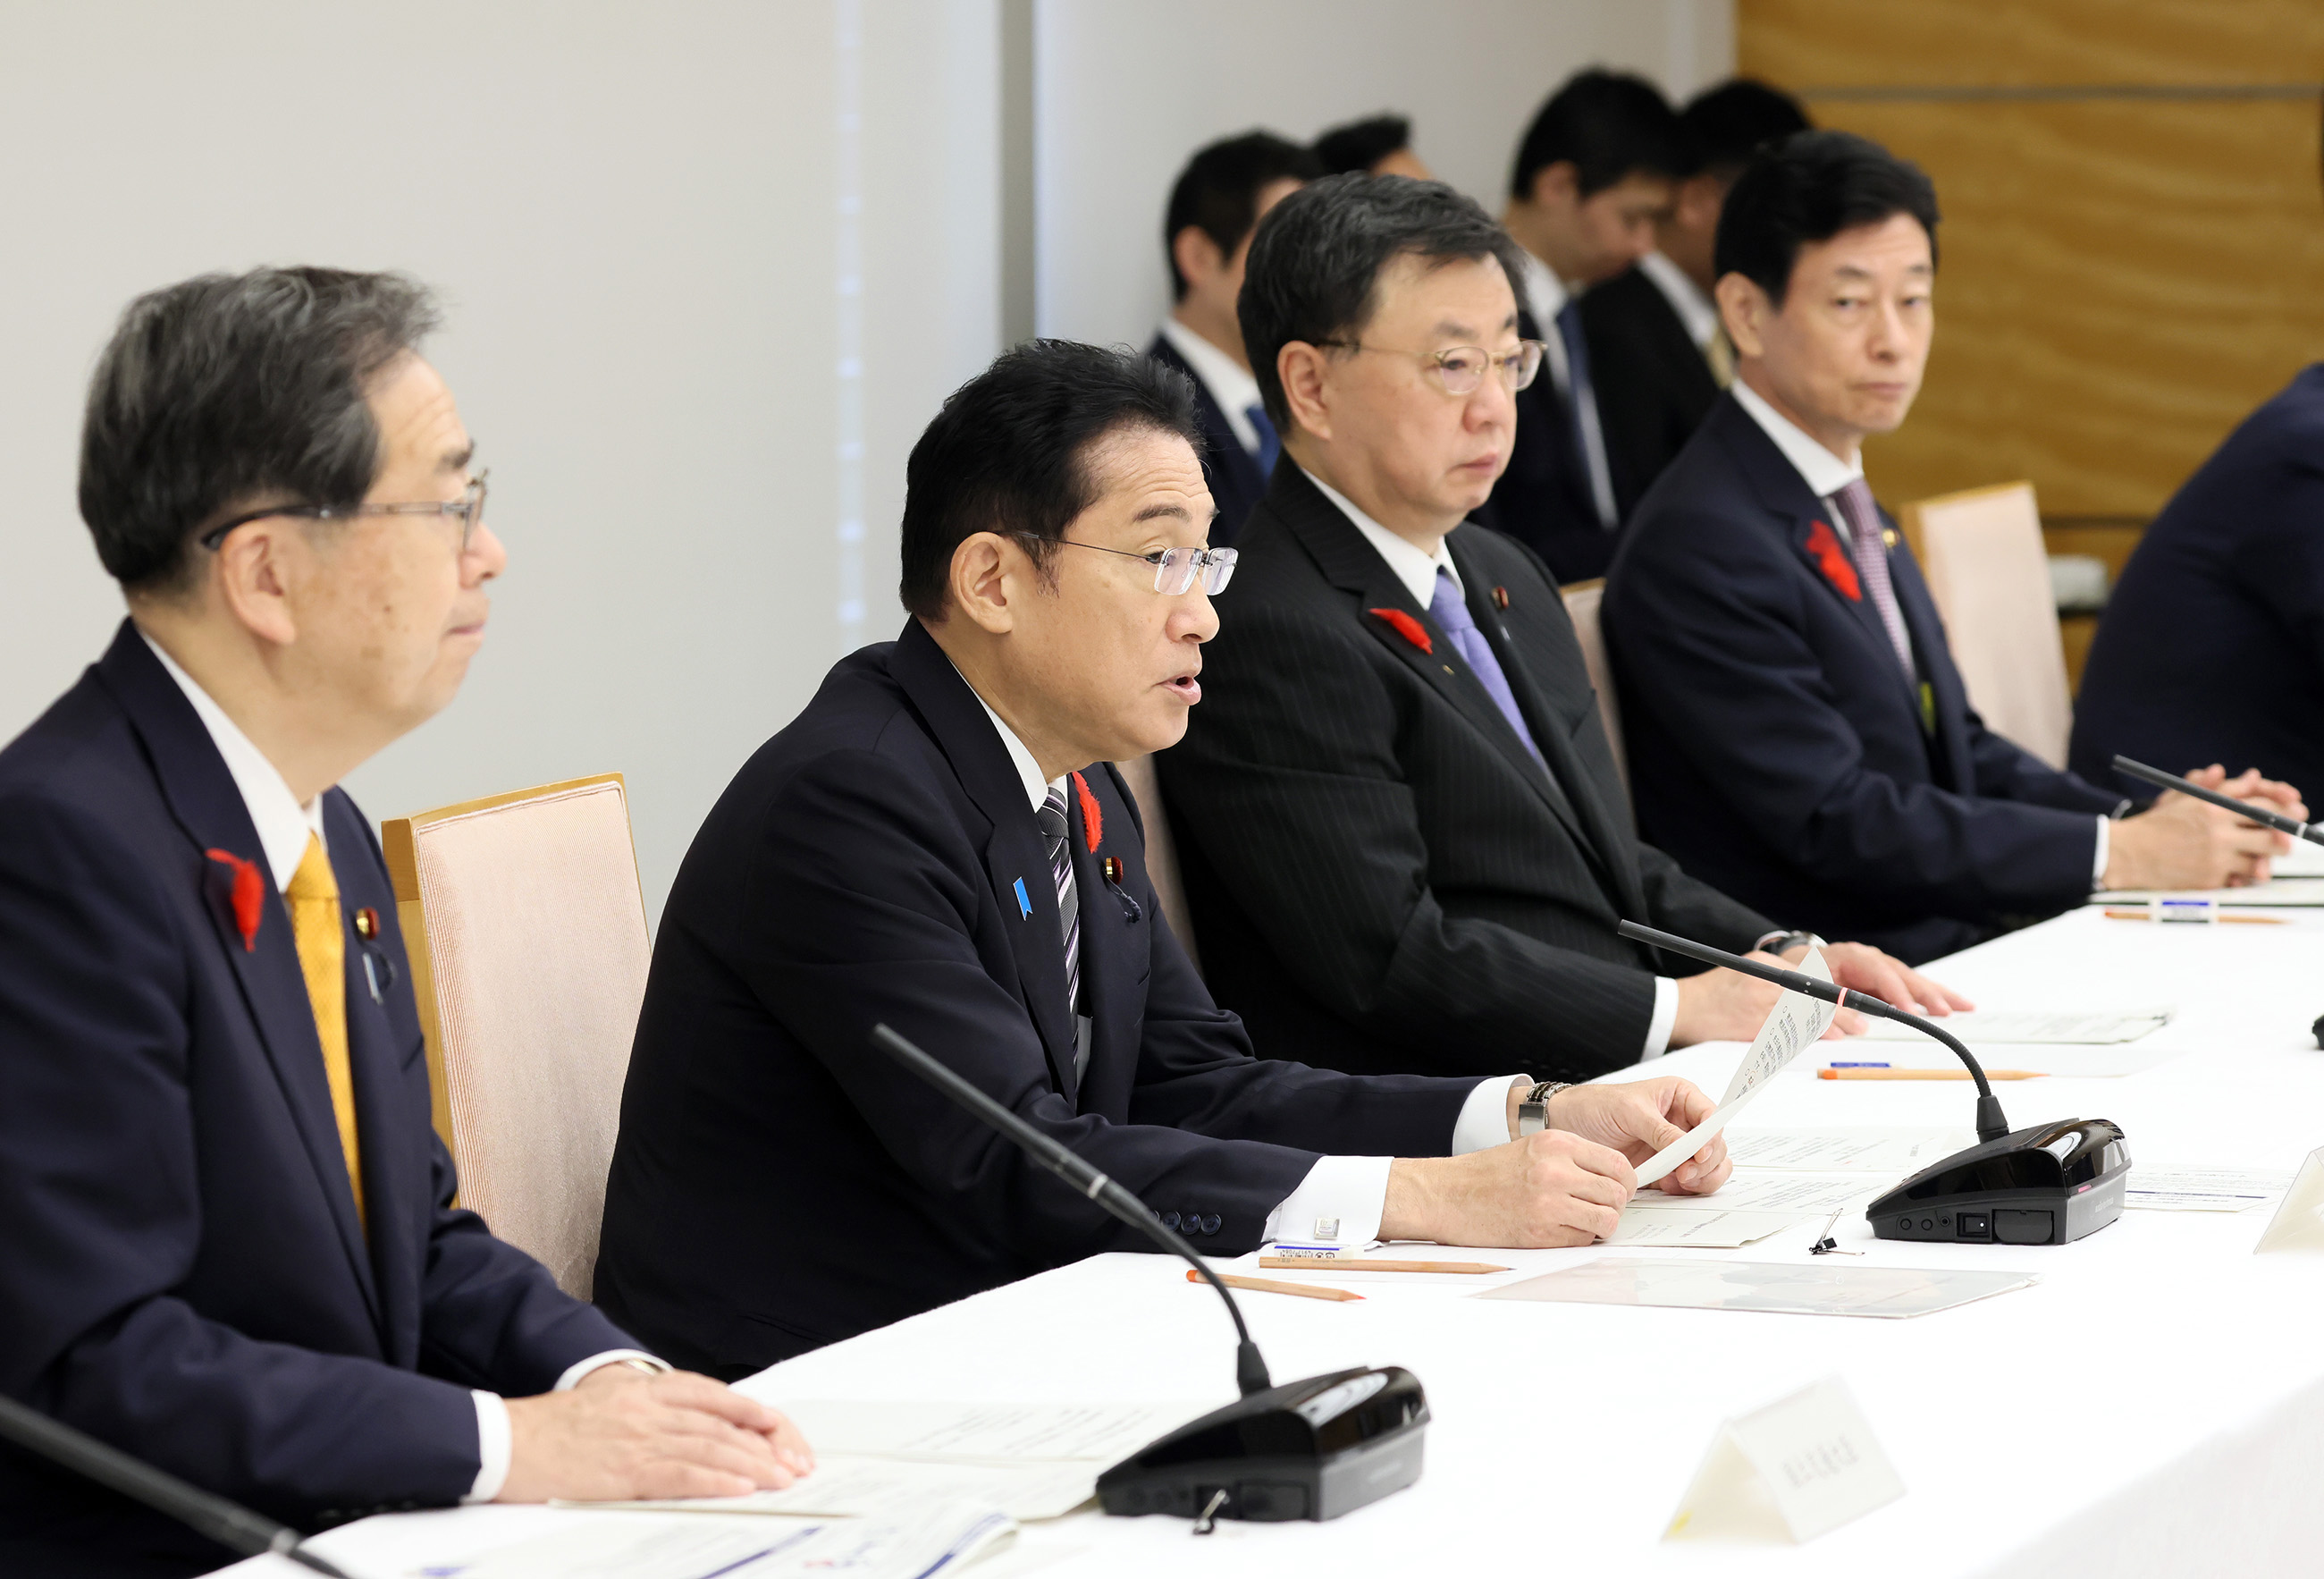 Ministerial Meeting on Japan’s Distribution Network Reform